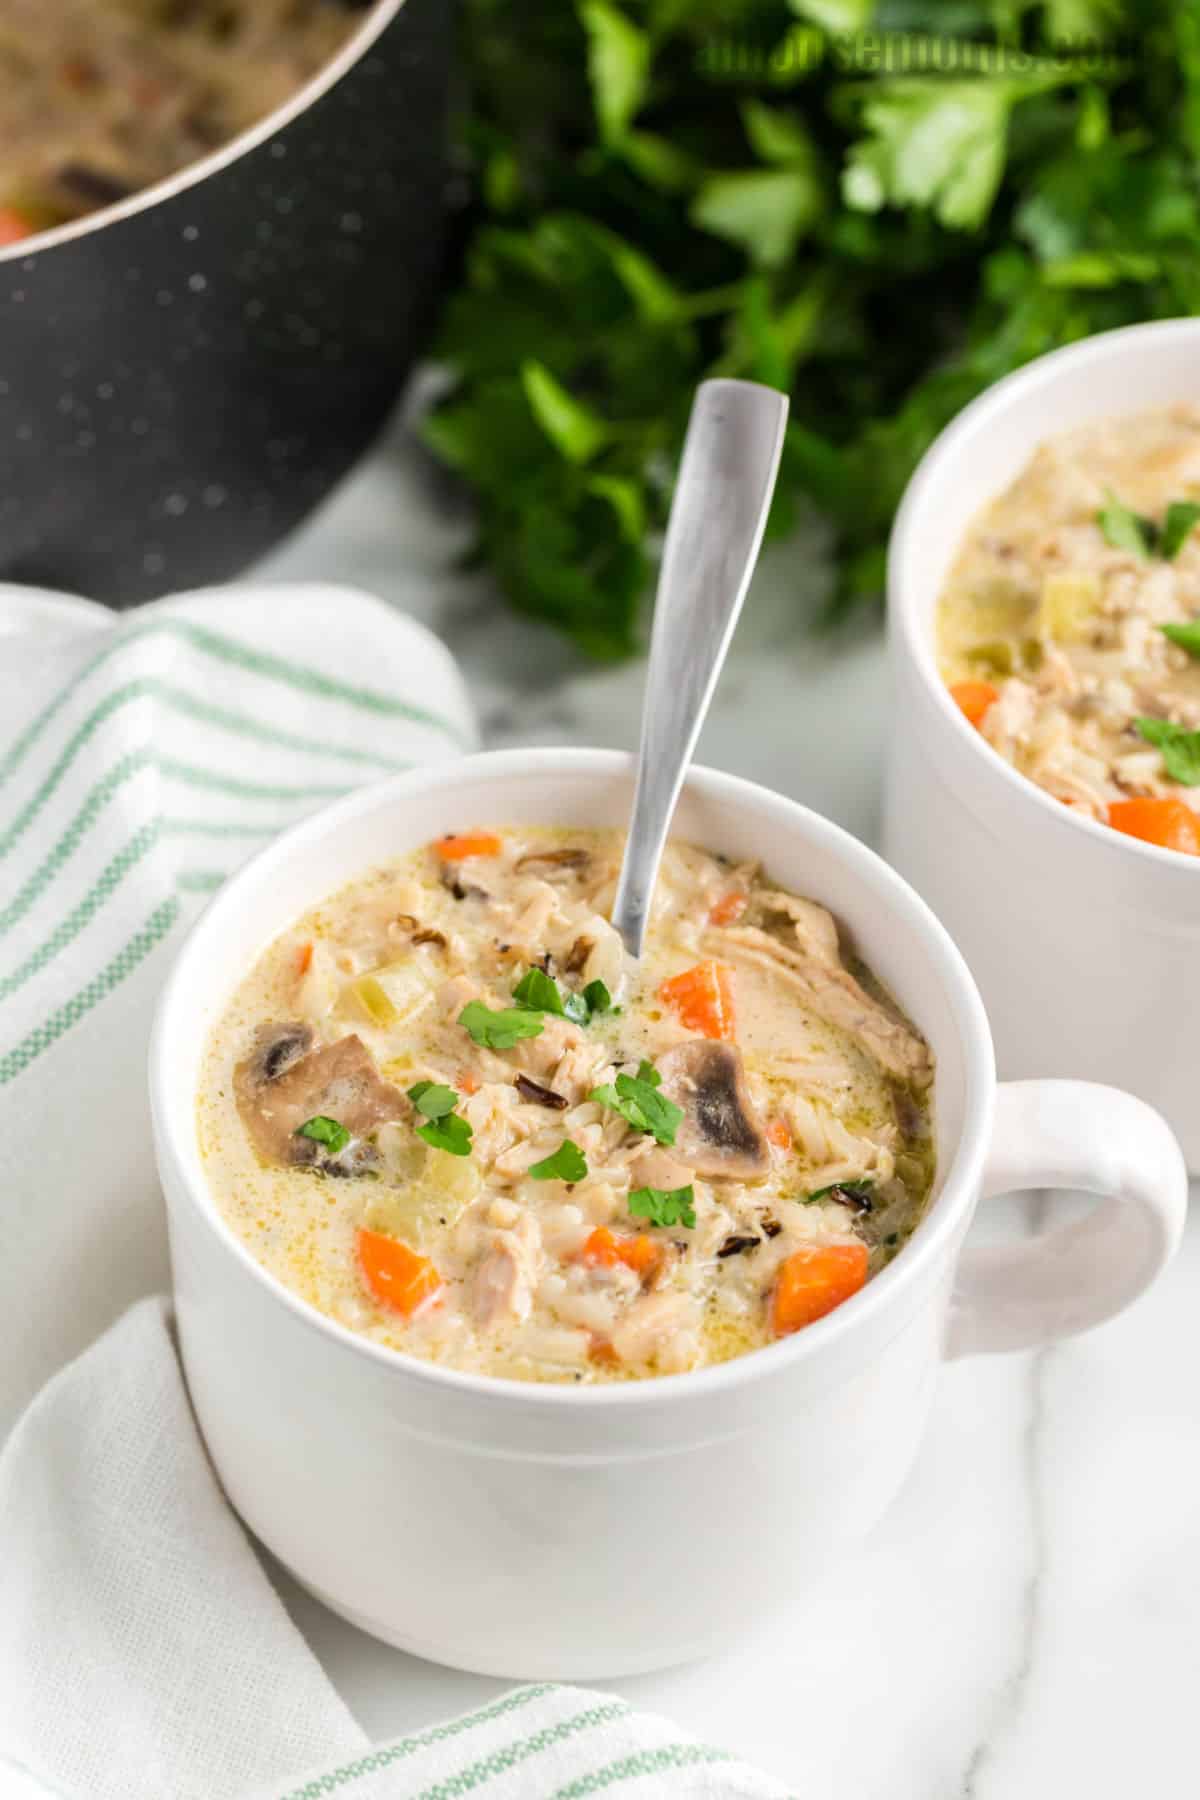 Creamy Chicken and Wild Rice Soup ⋆ Real Housemoms